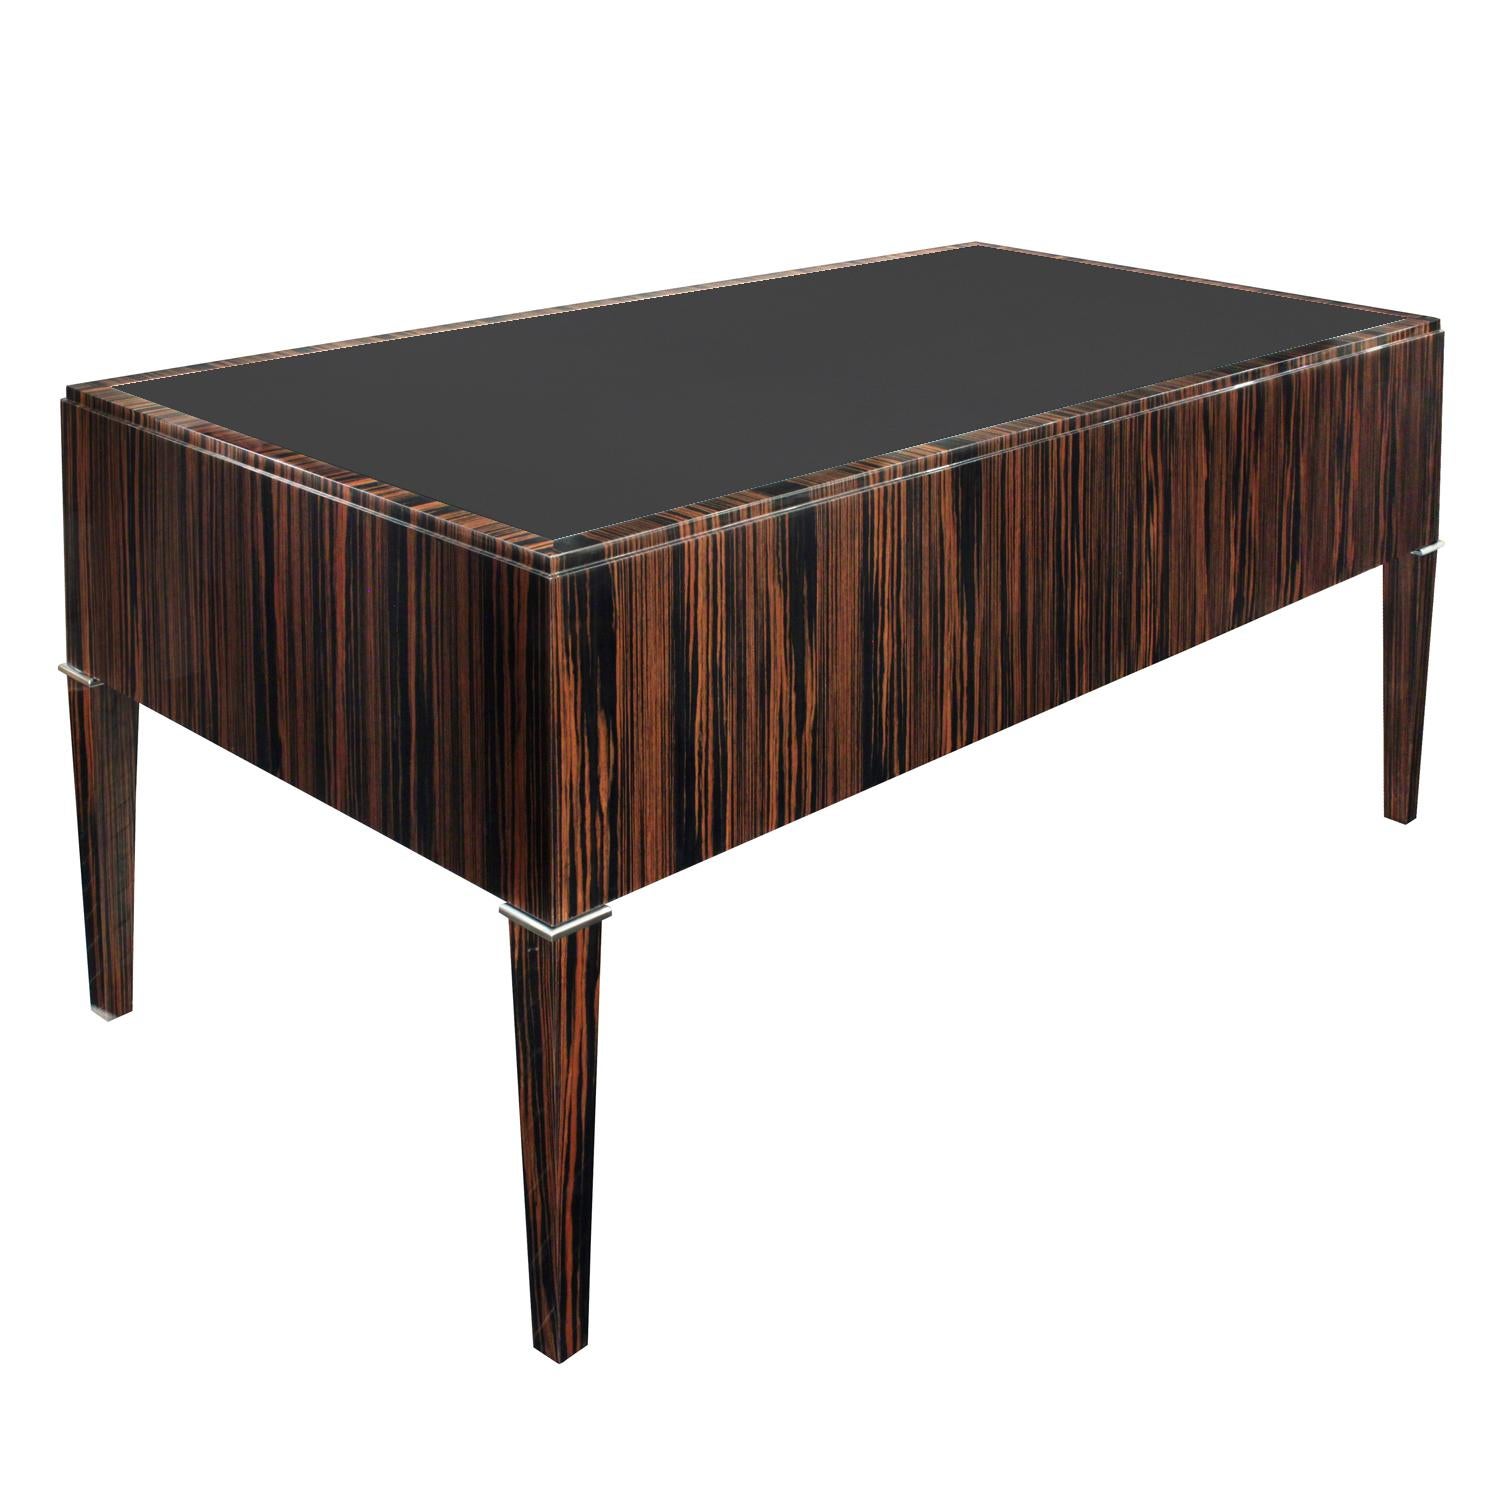 Art Deco Lobel Originals Desk in Macassar Ebony with Leather Top, Made to Order For Sale